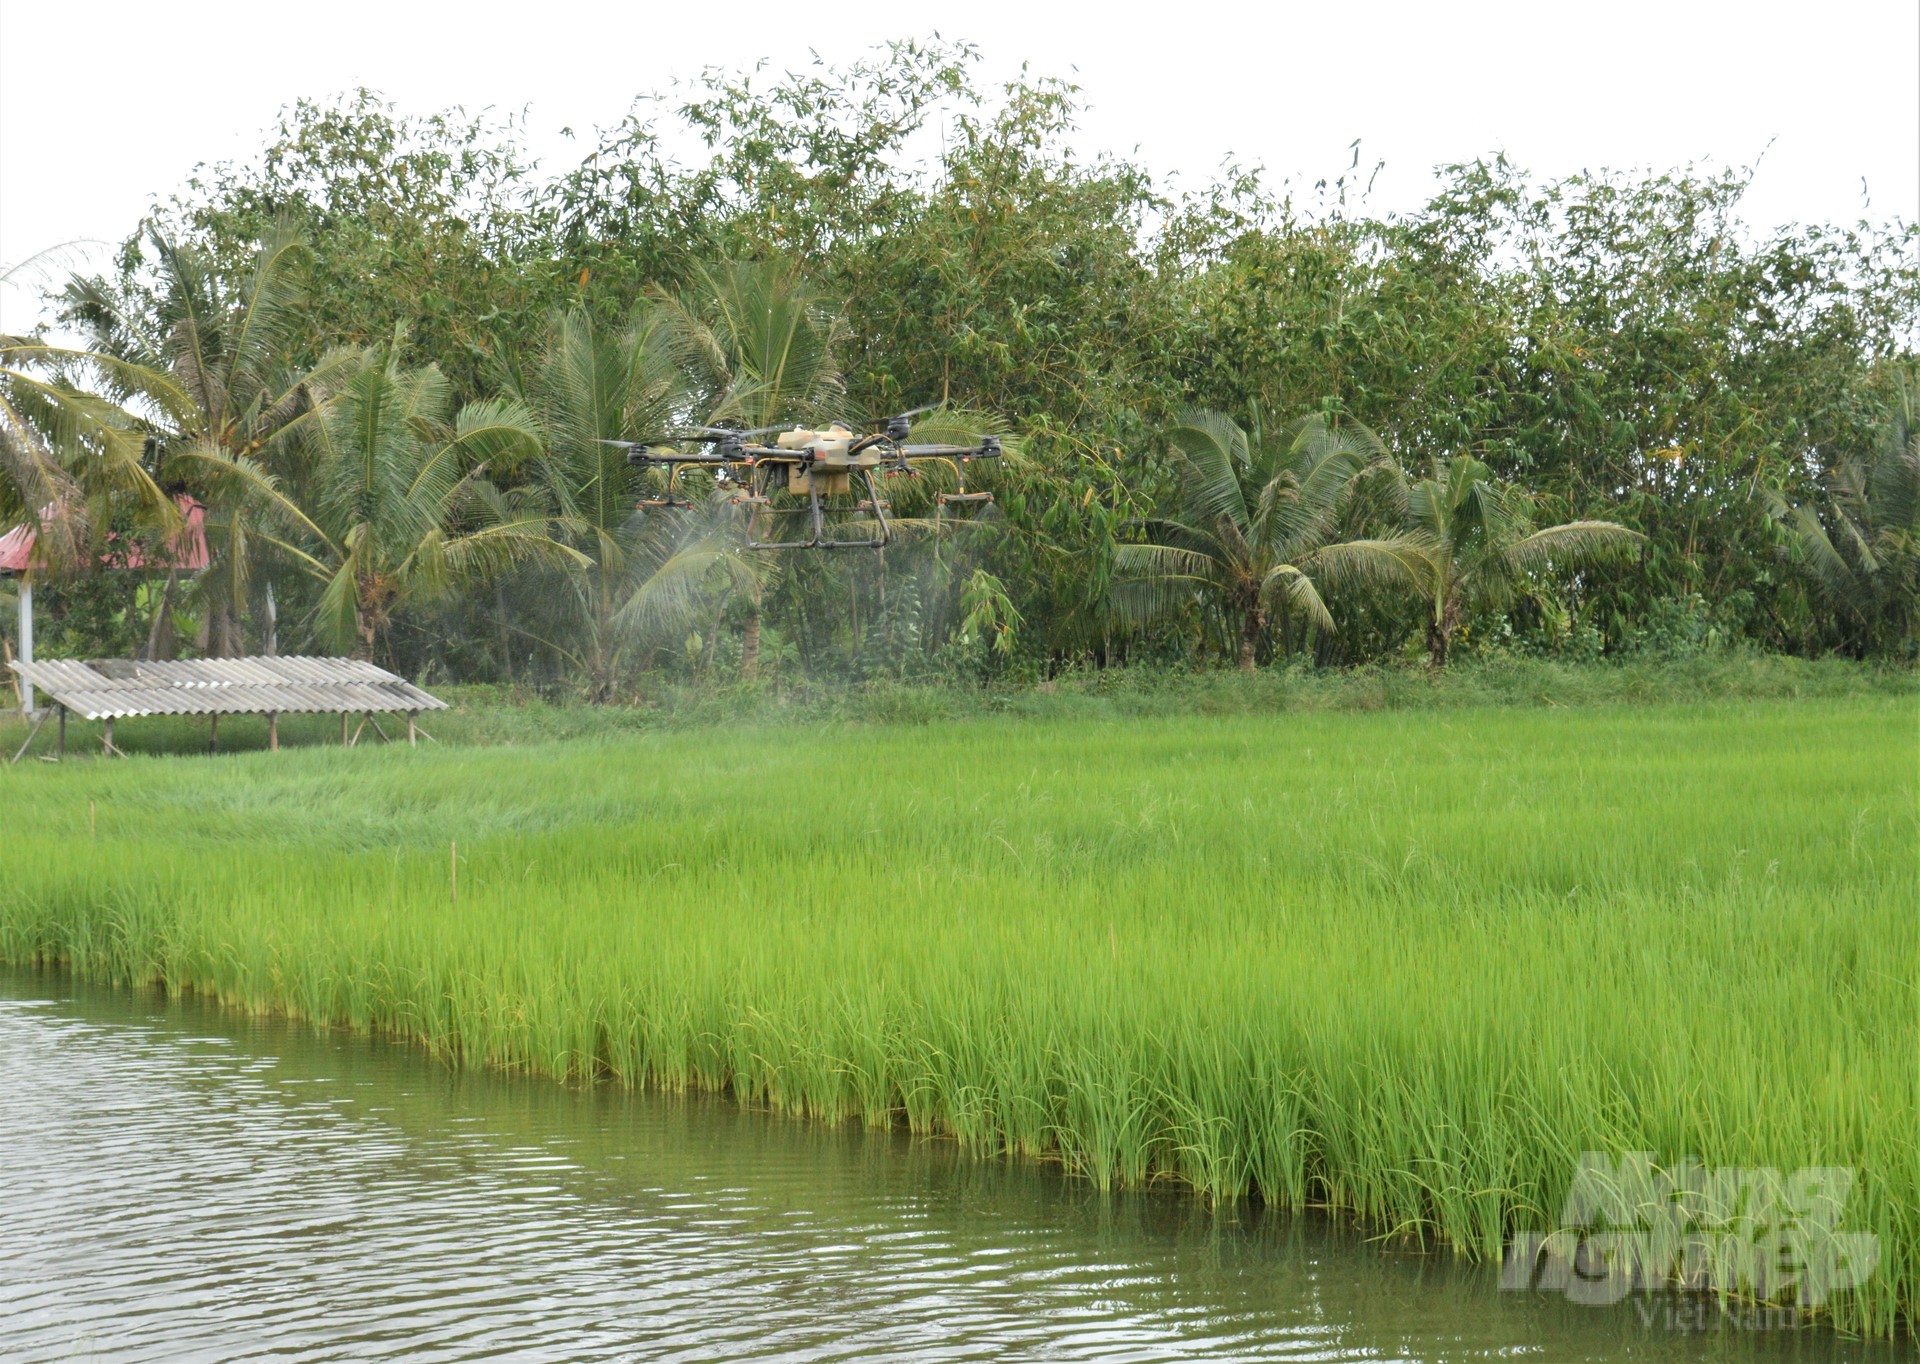 Farmers use drones to care for and protect rice, helping to ensure rice yield and quality. Photo: Trung Chanh.